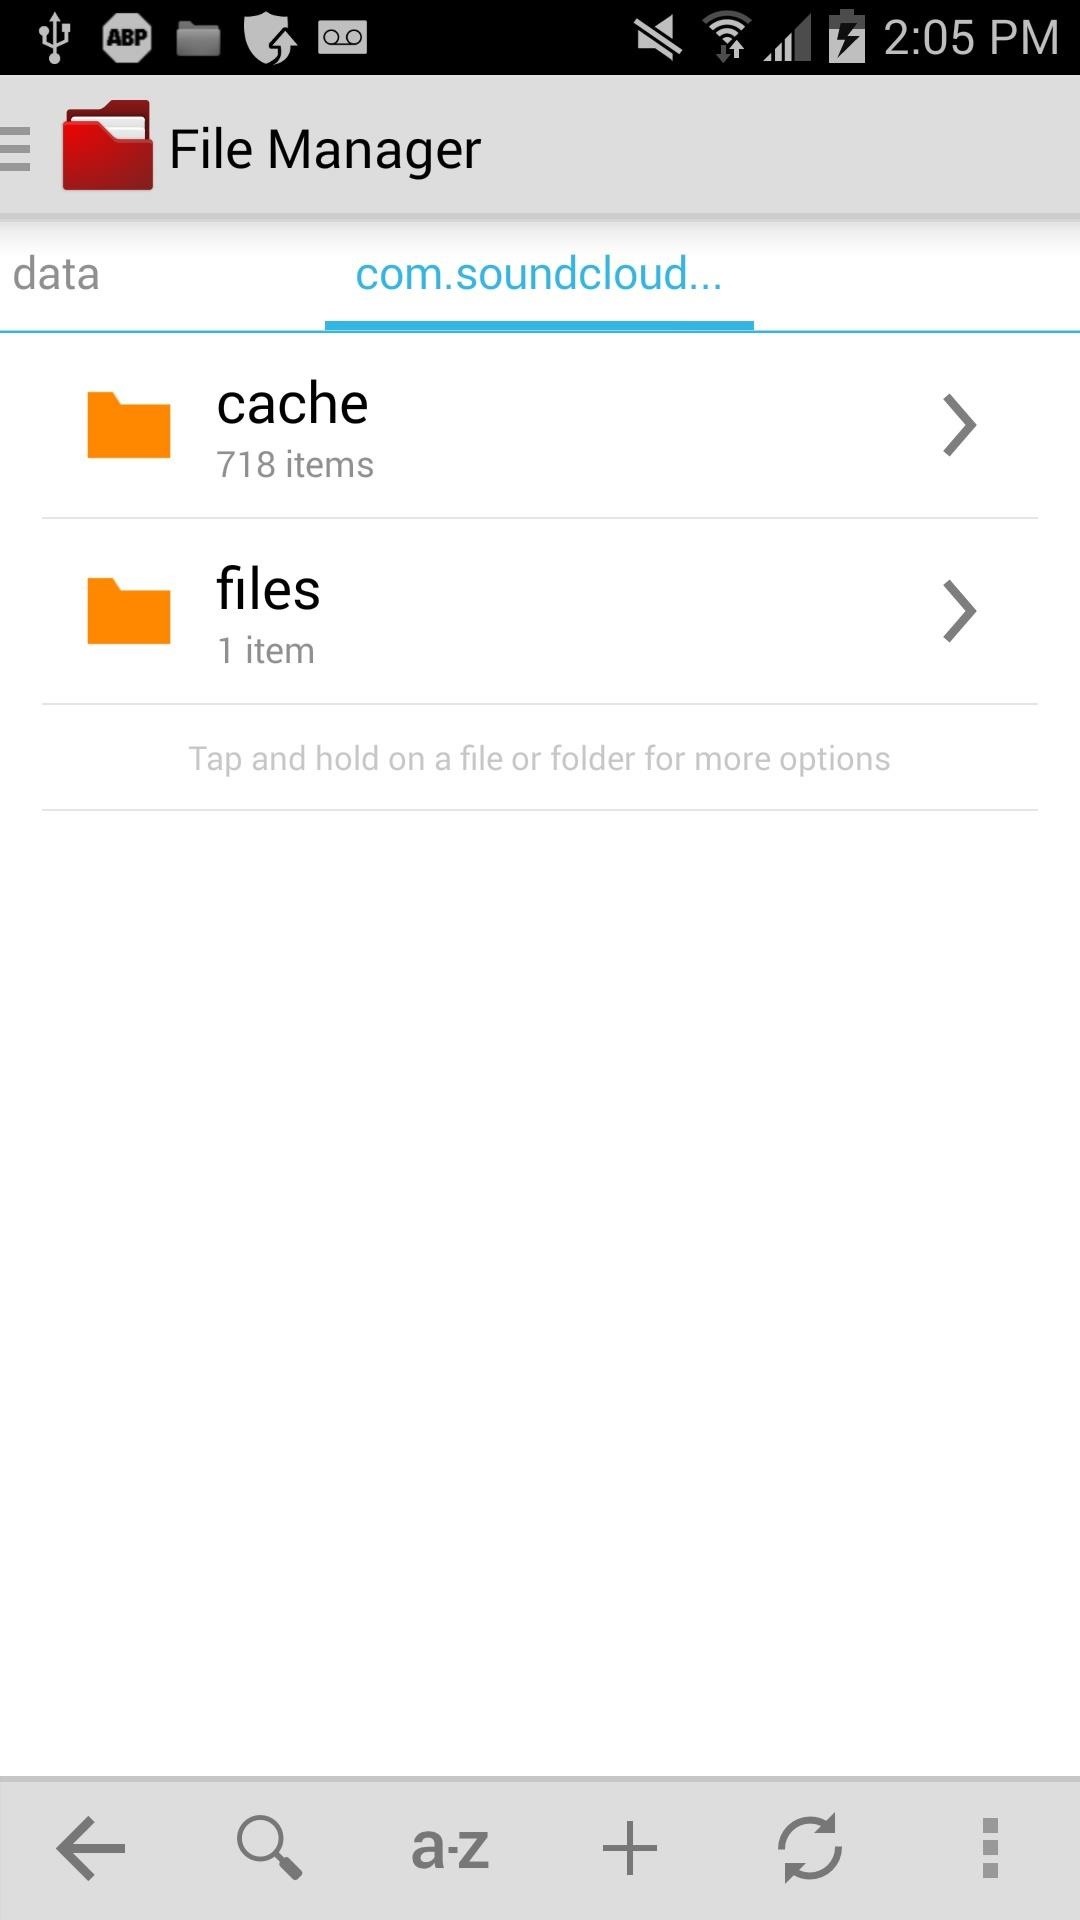 How to Download SoundCloud Tracks for Offline Playback on Your Samsung Galaxy Note 3